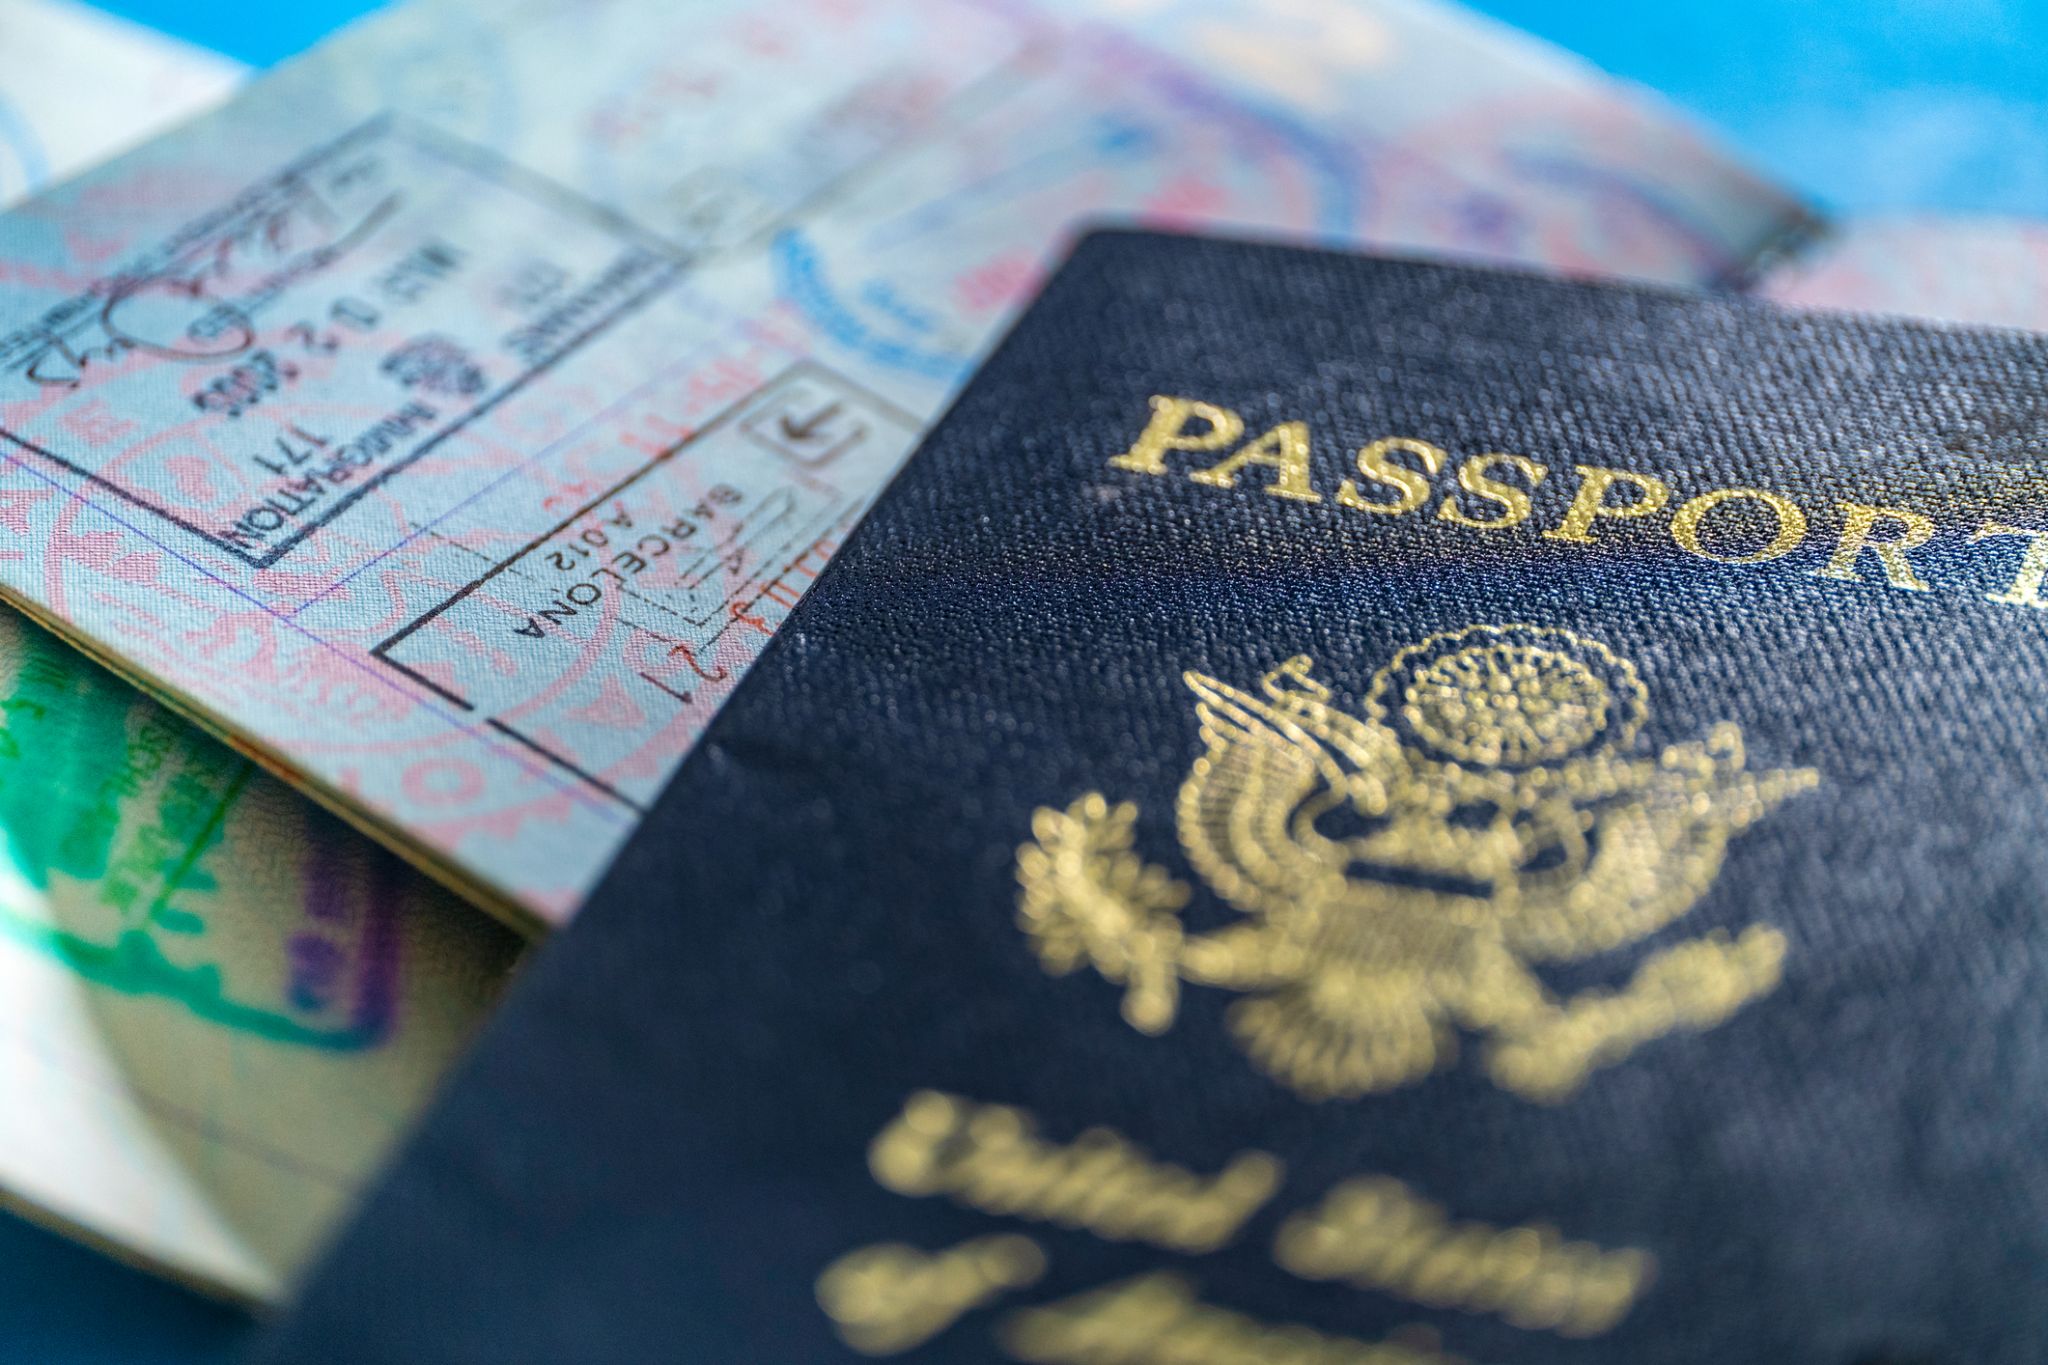 On Wednesday evening, the U.S. Department of State shut down its online appointment system for passport applicants citing scammers who had been grabbi